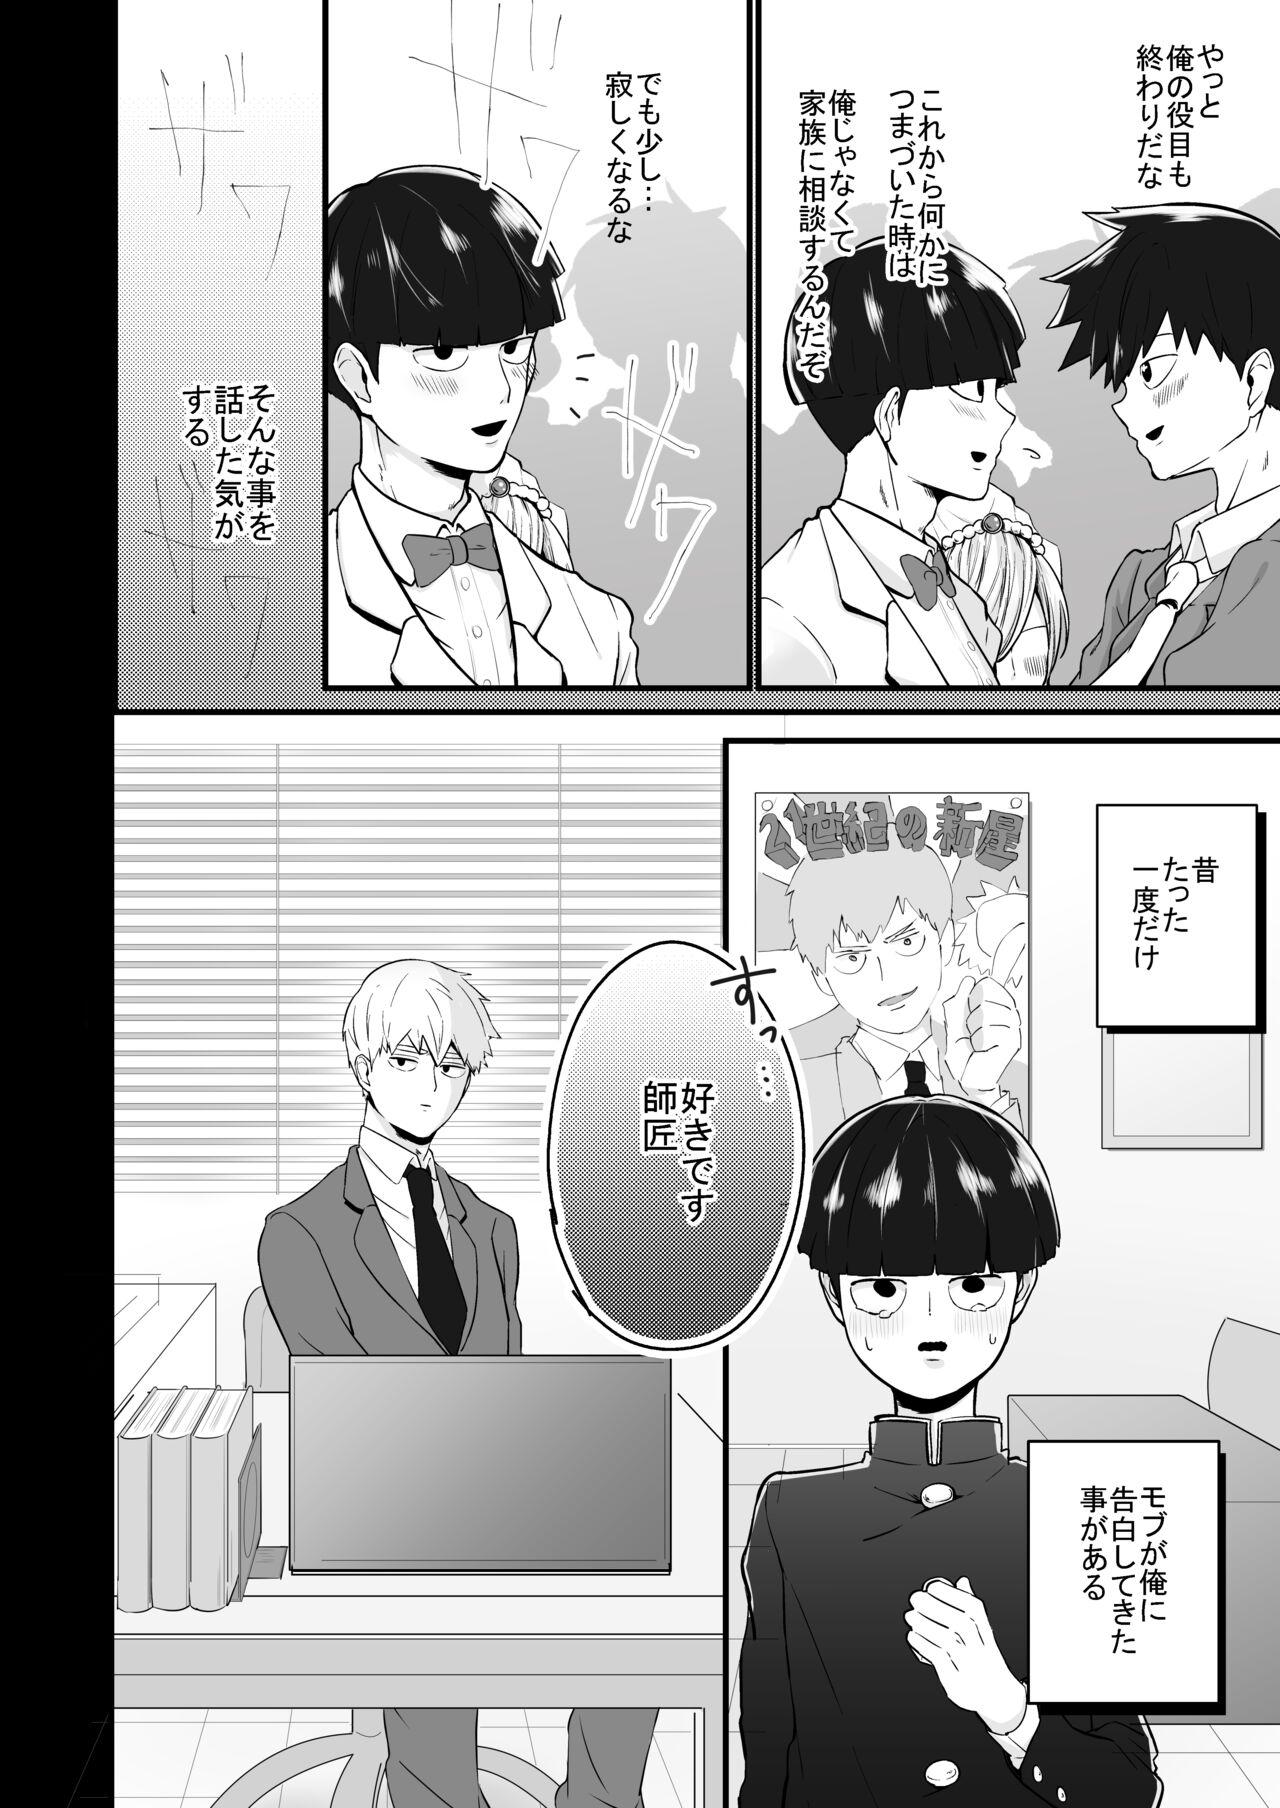 Submissive Dearest love - Mob psycho 100 Peru - Page 6